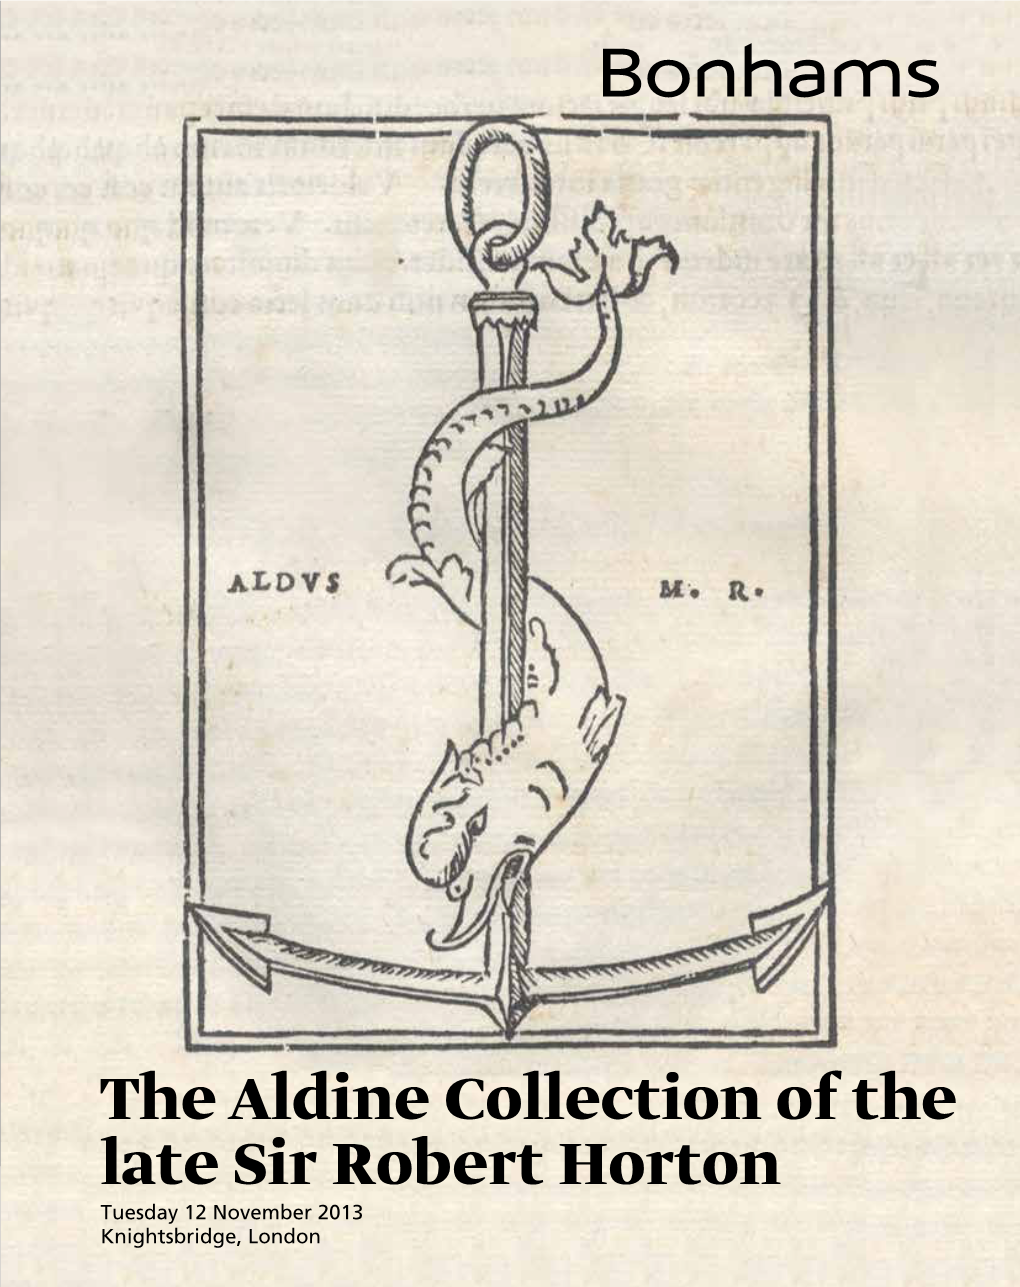 The Aldine Collection of the Late Sir Robert Horton